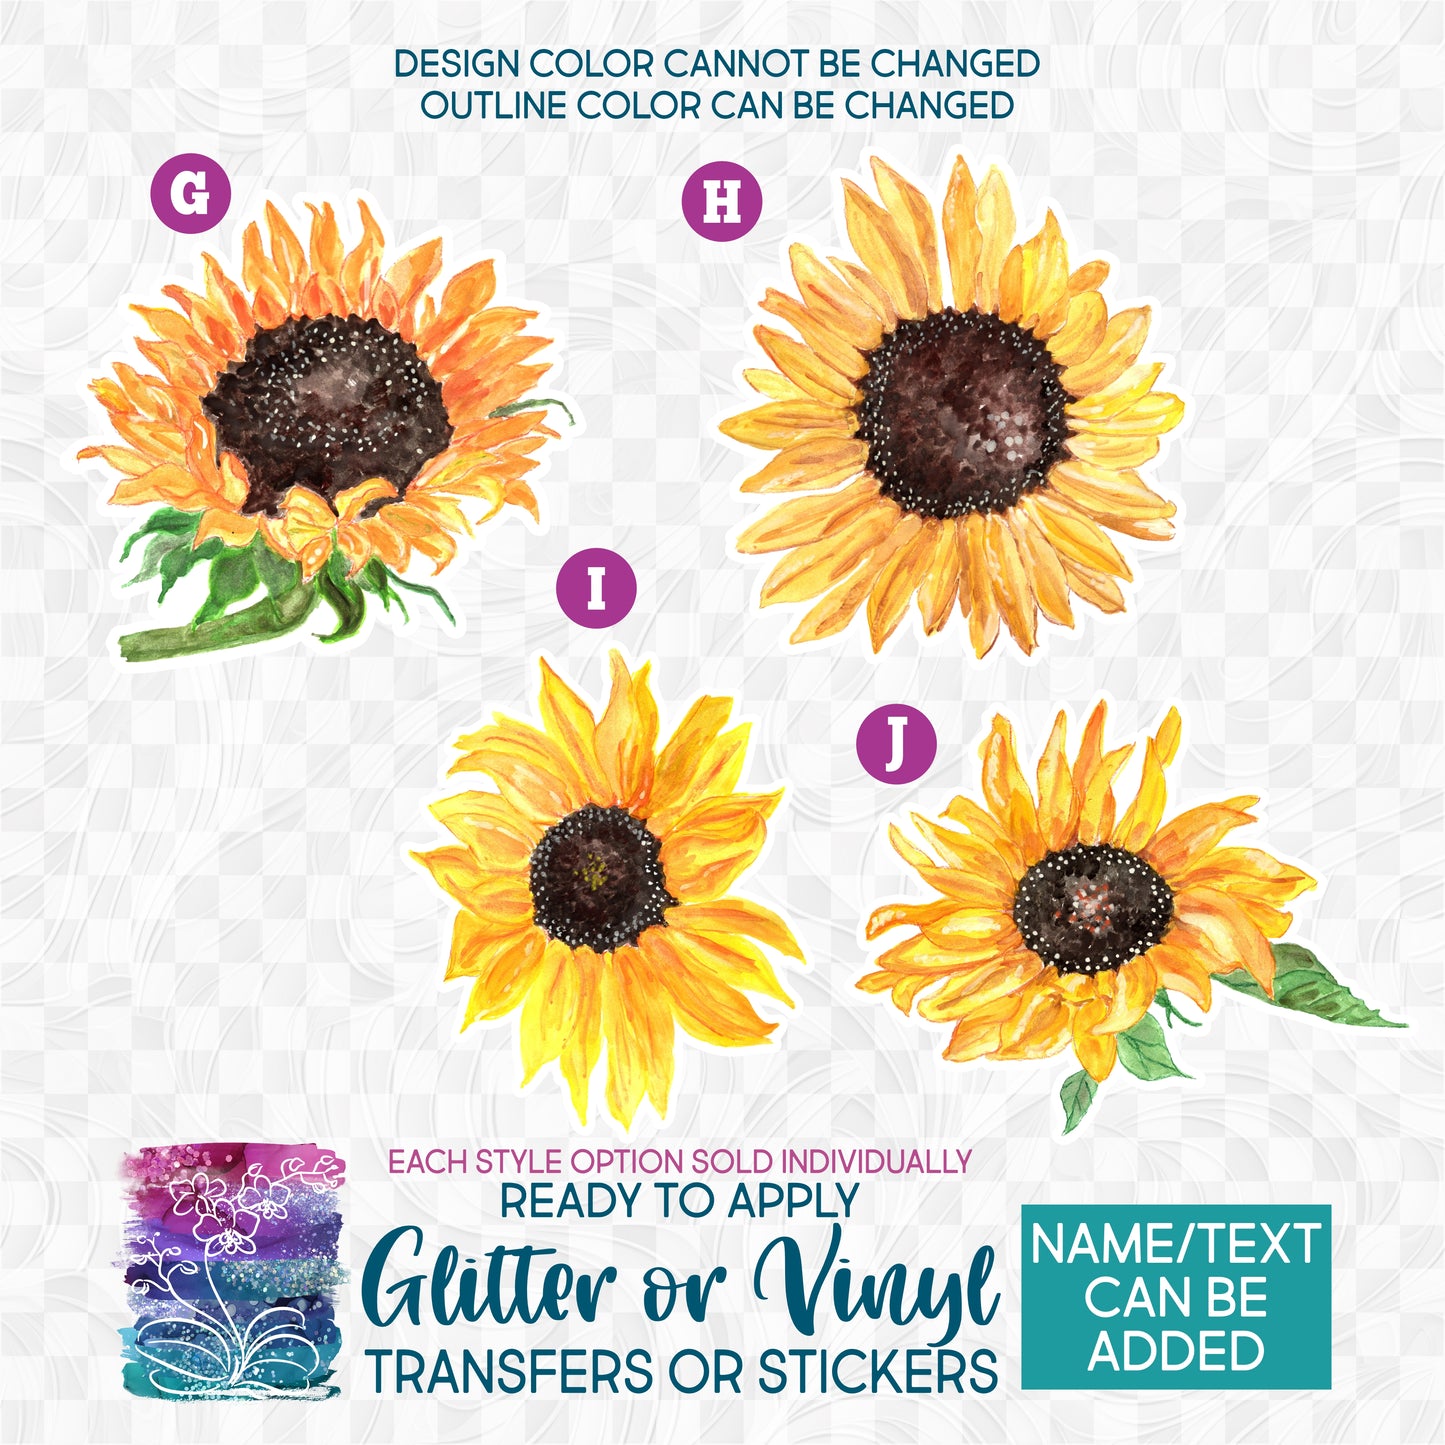 (s137) Watercolor Rustic Sunflower Sunflowers Bee Flowers Glitter or Vinyl Iron-On Transfer or Sticker